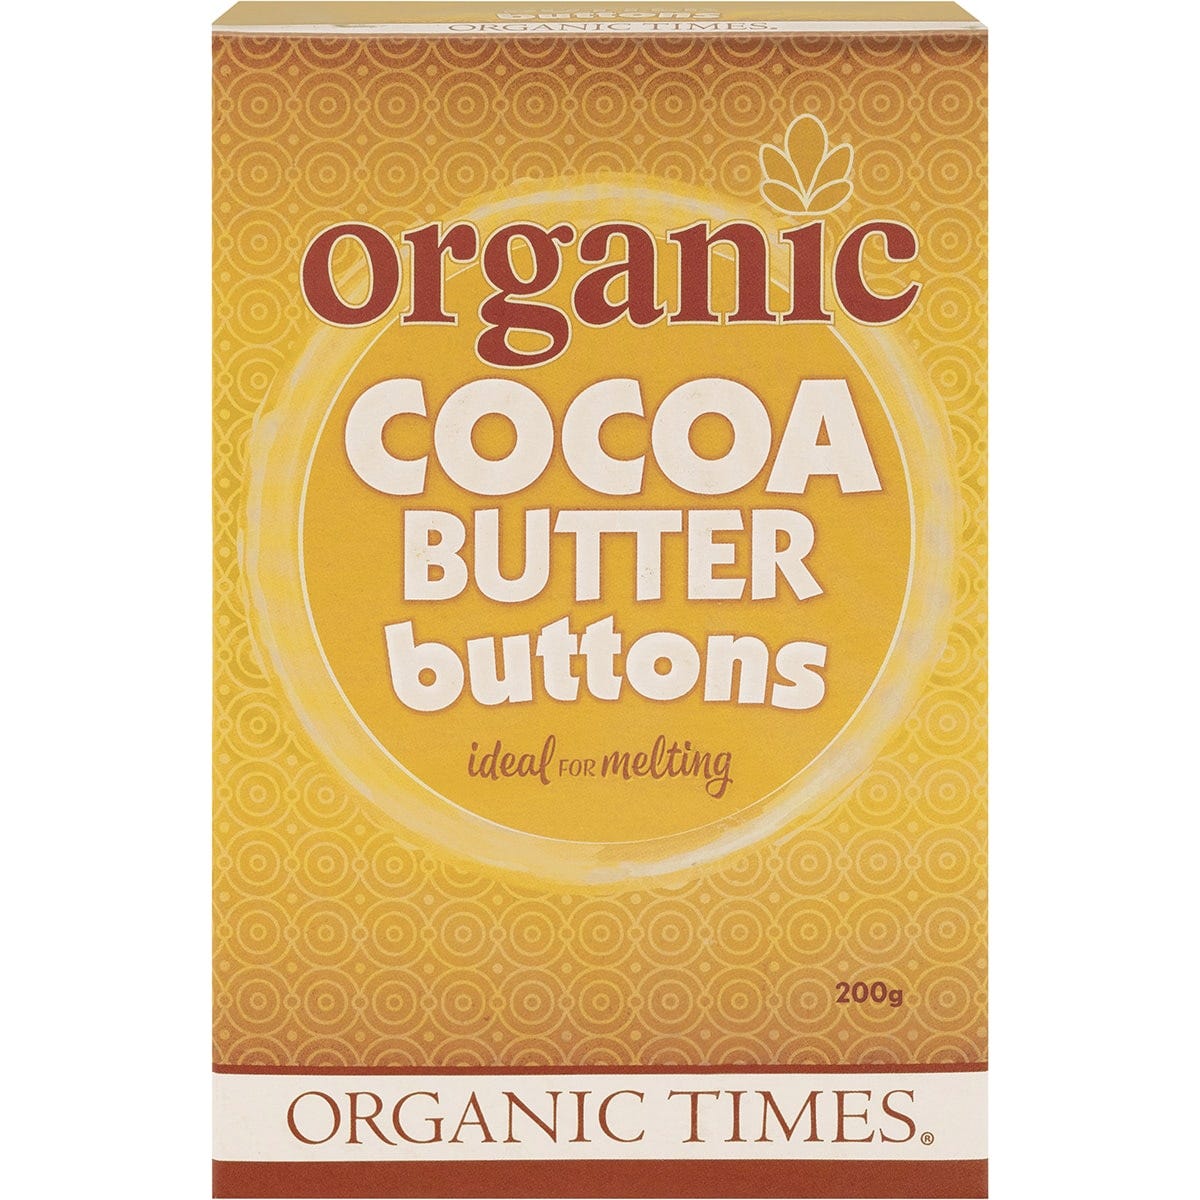 Cocoa Butter Buttons